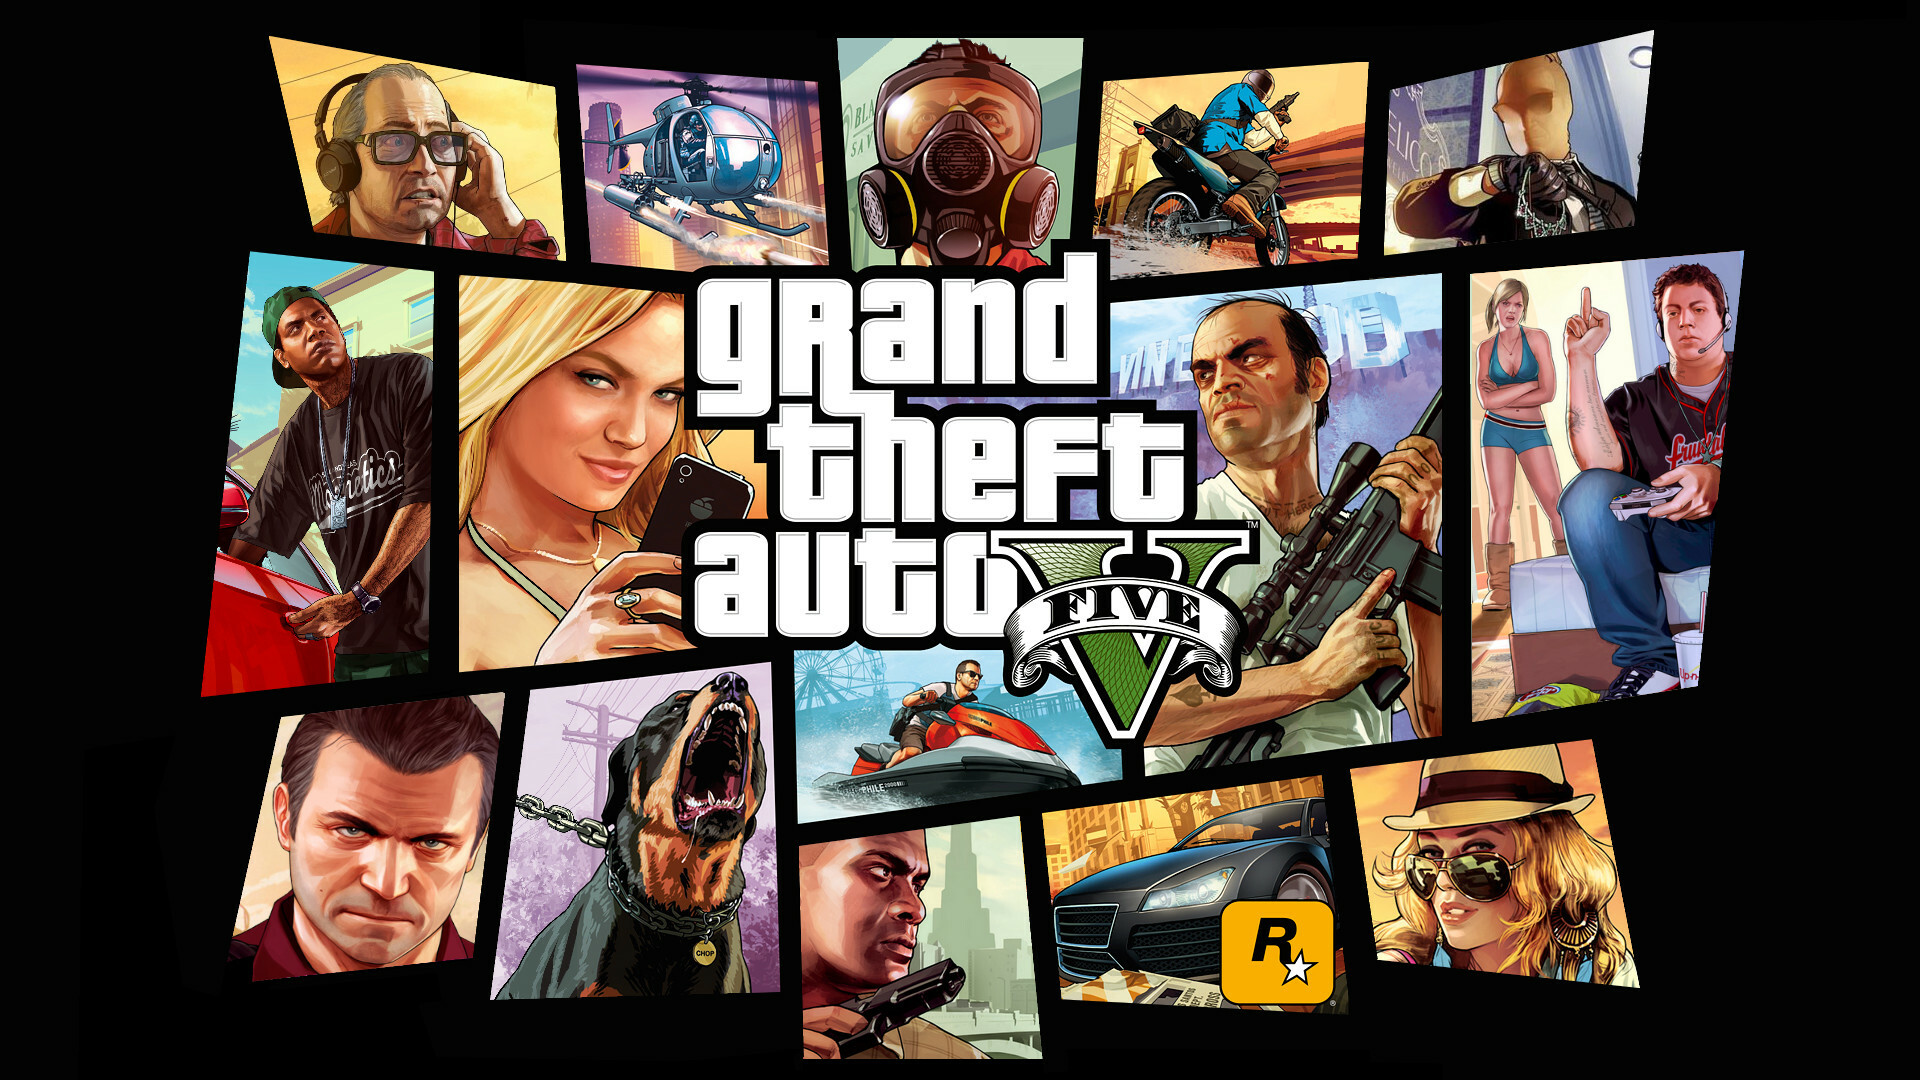 Grand Theft Auto 5: A 2013 action-adventure game developed by Rockstar North. 1920x1080 Full HD Wallpaper.